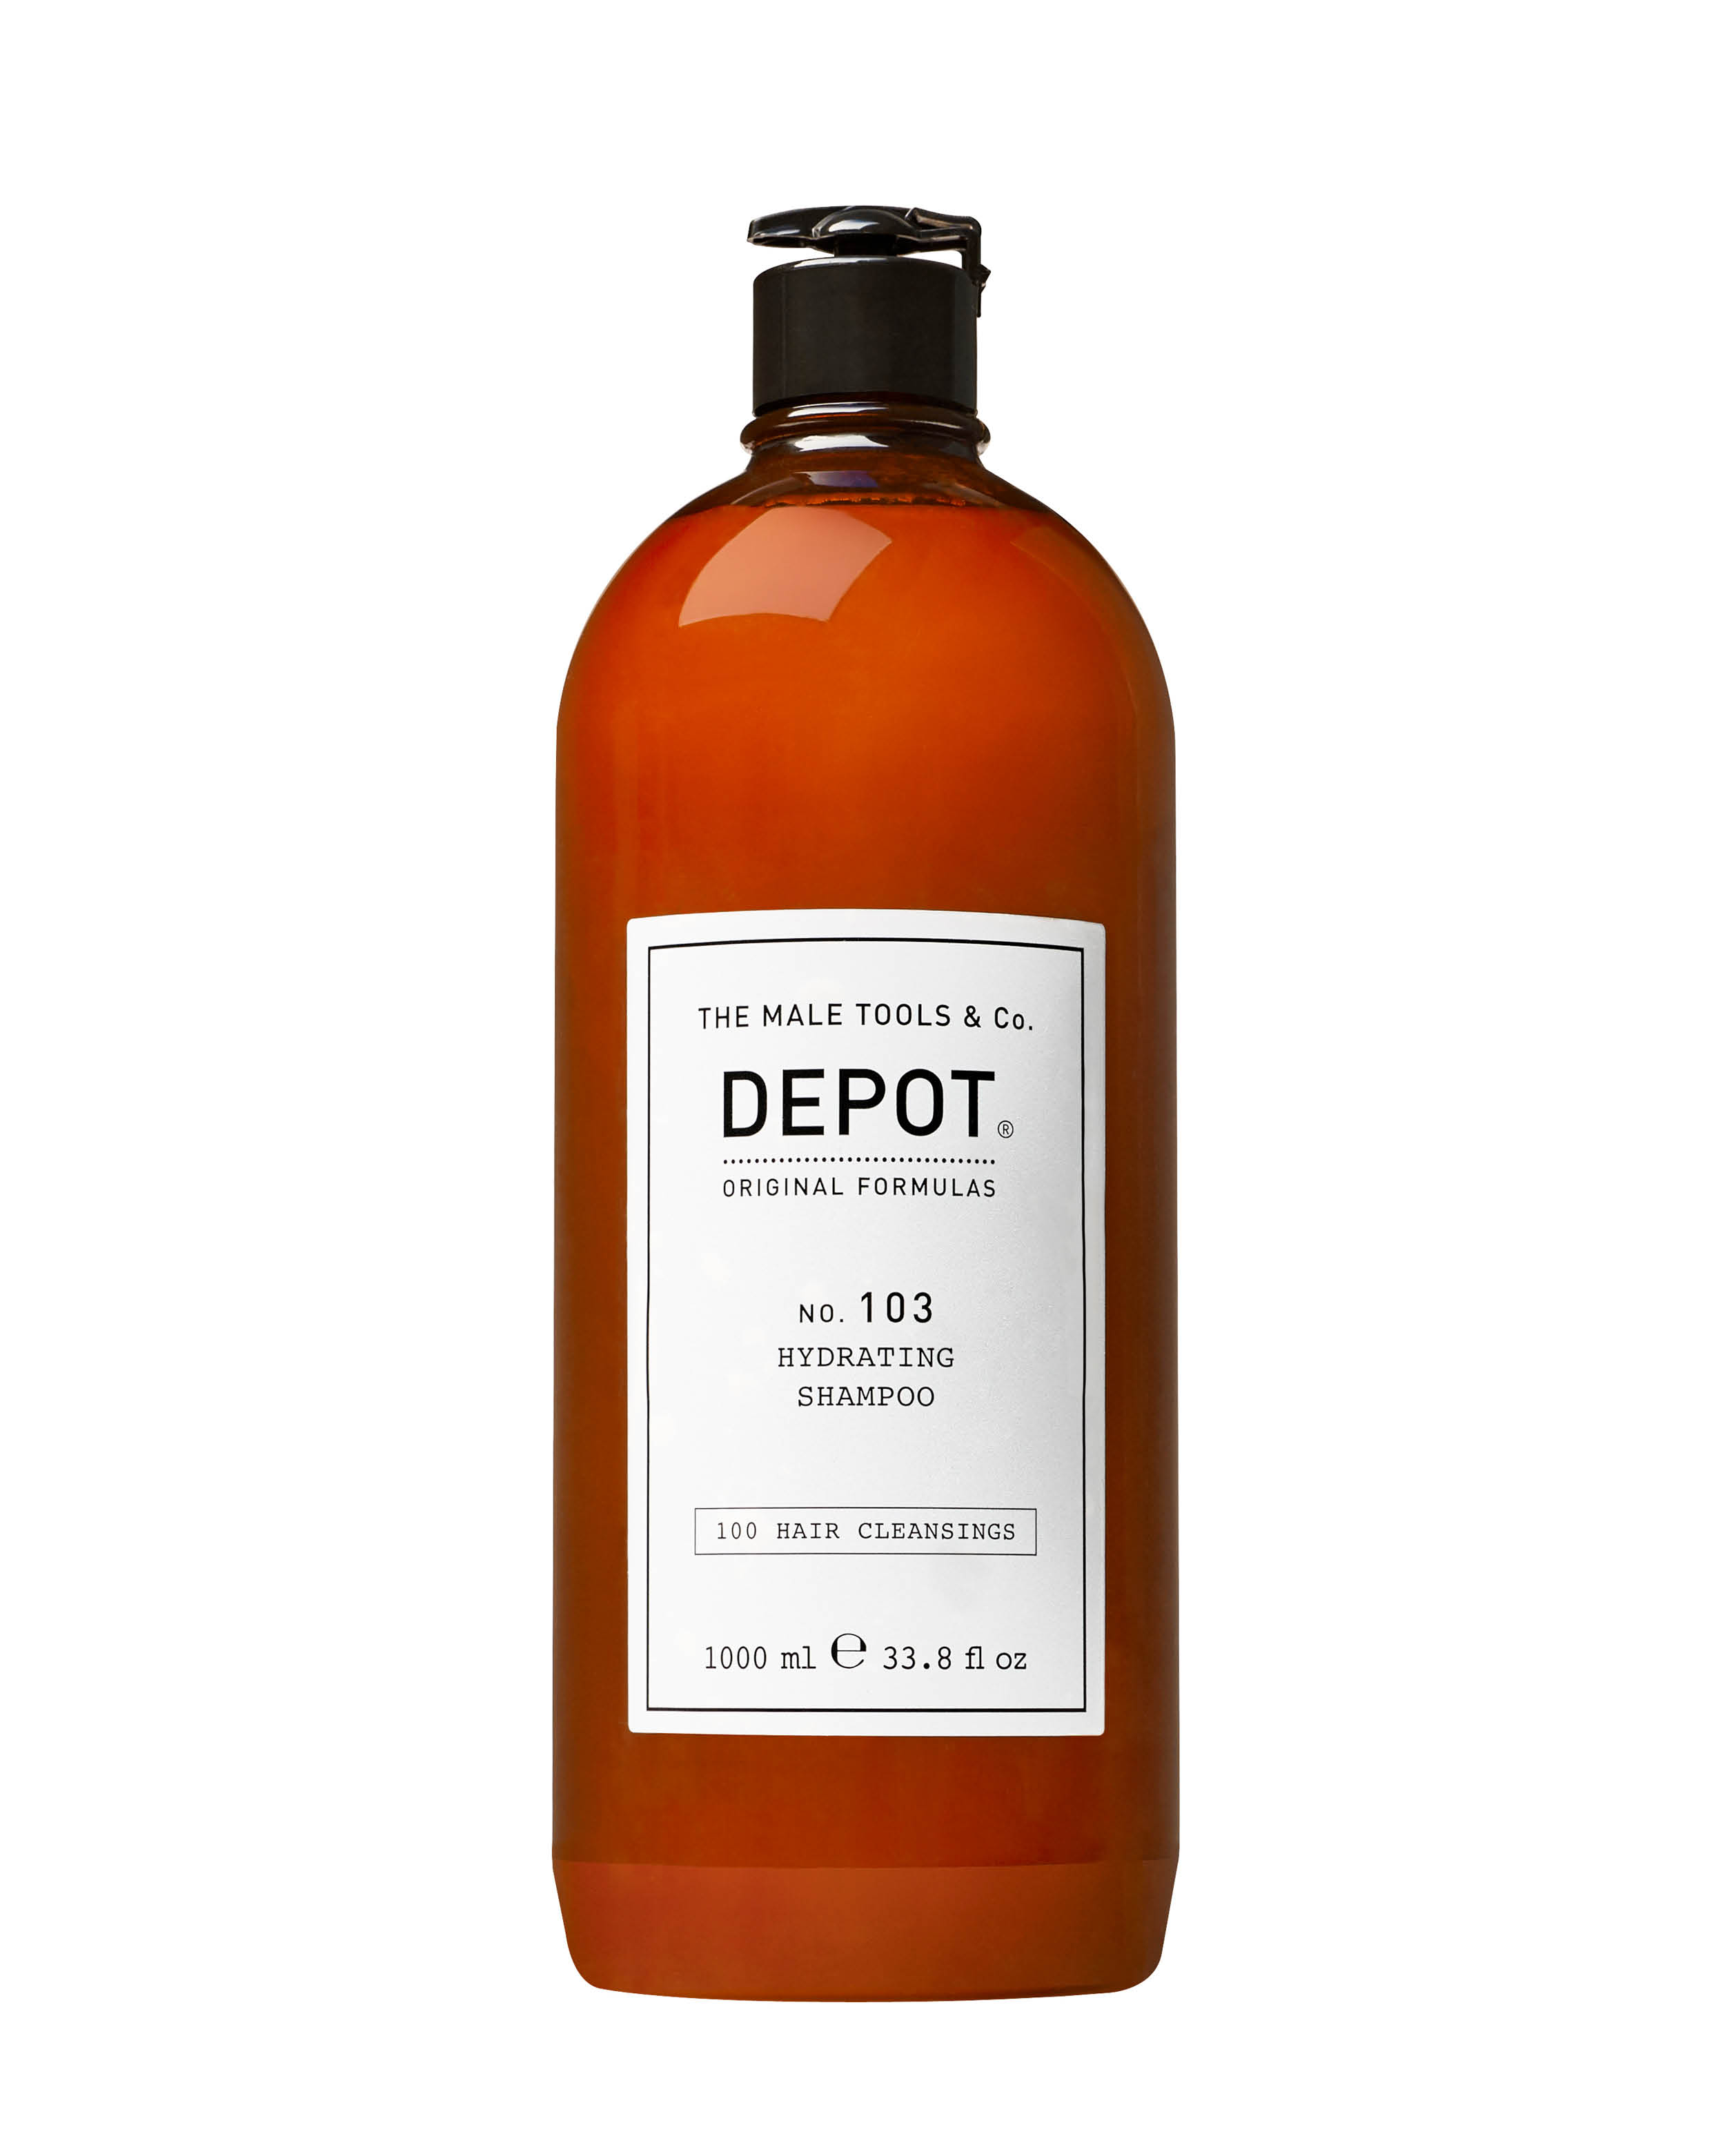 Depot 103 Shampooing hydratant pour hommes